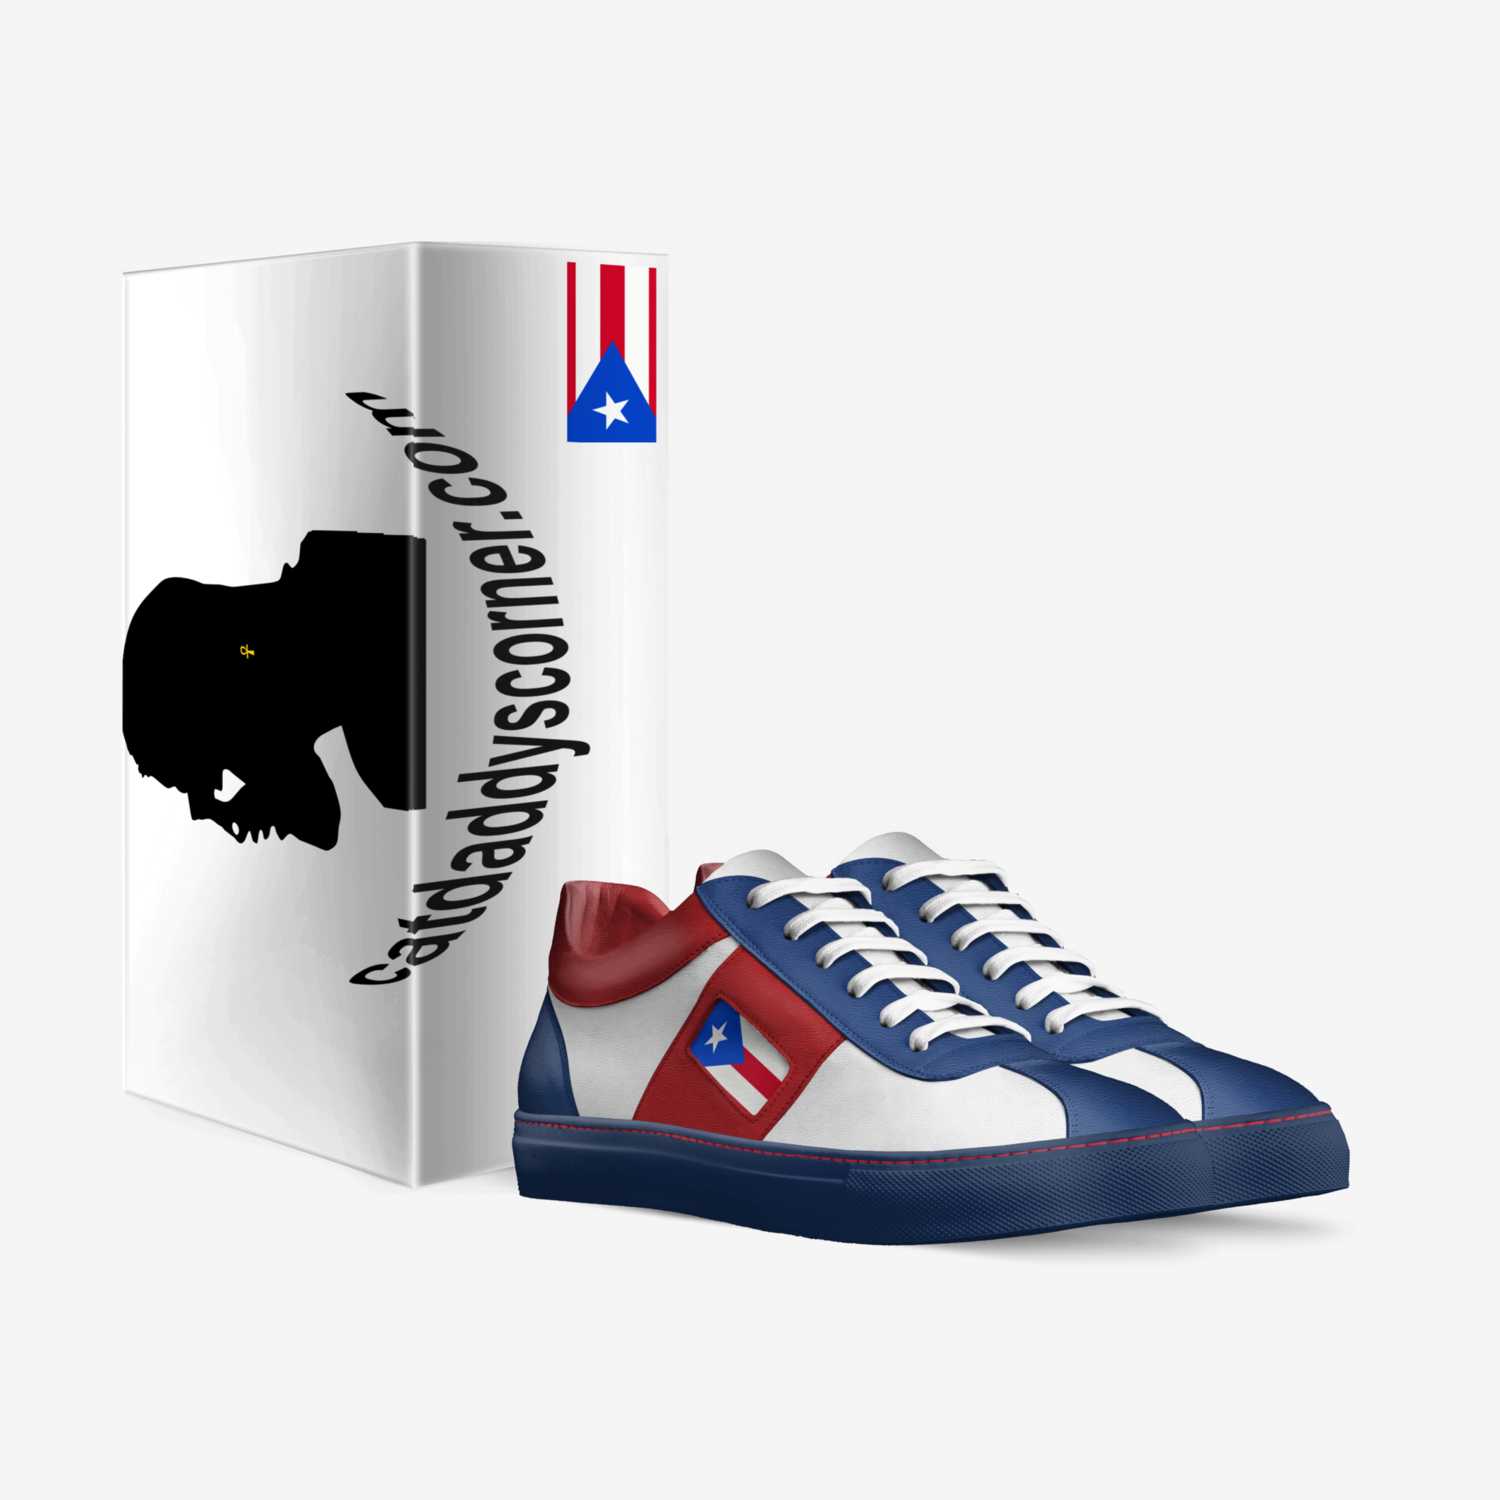 Puerto Rican Pride custom made in Italy shoes by Scott Thomas | Box view